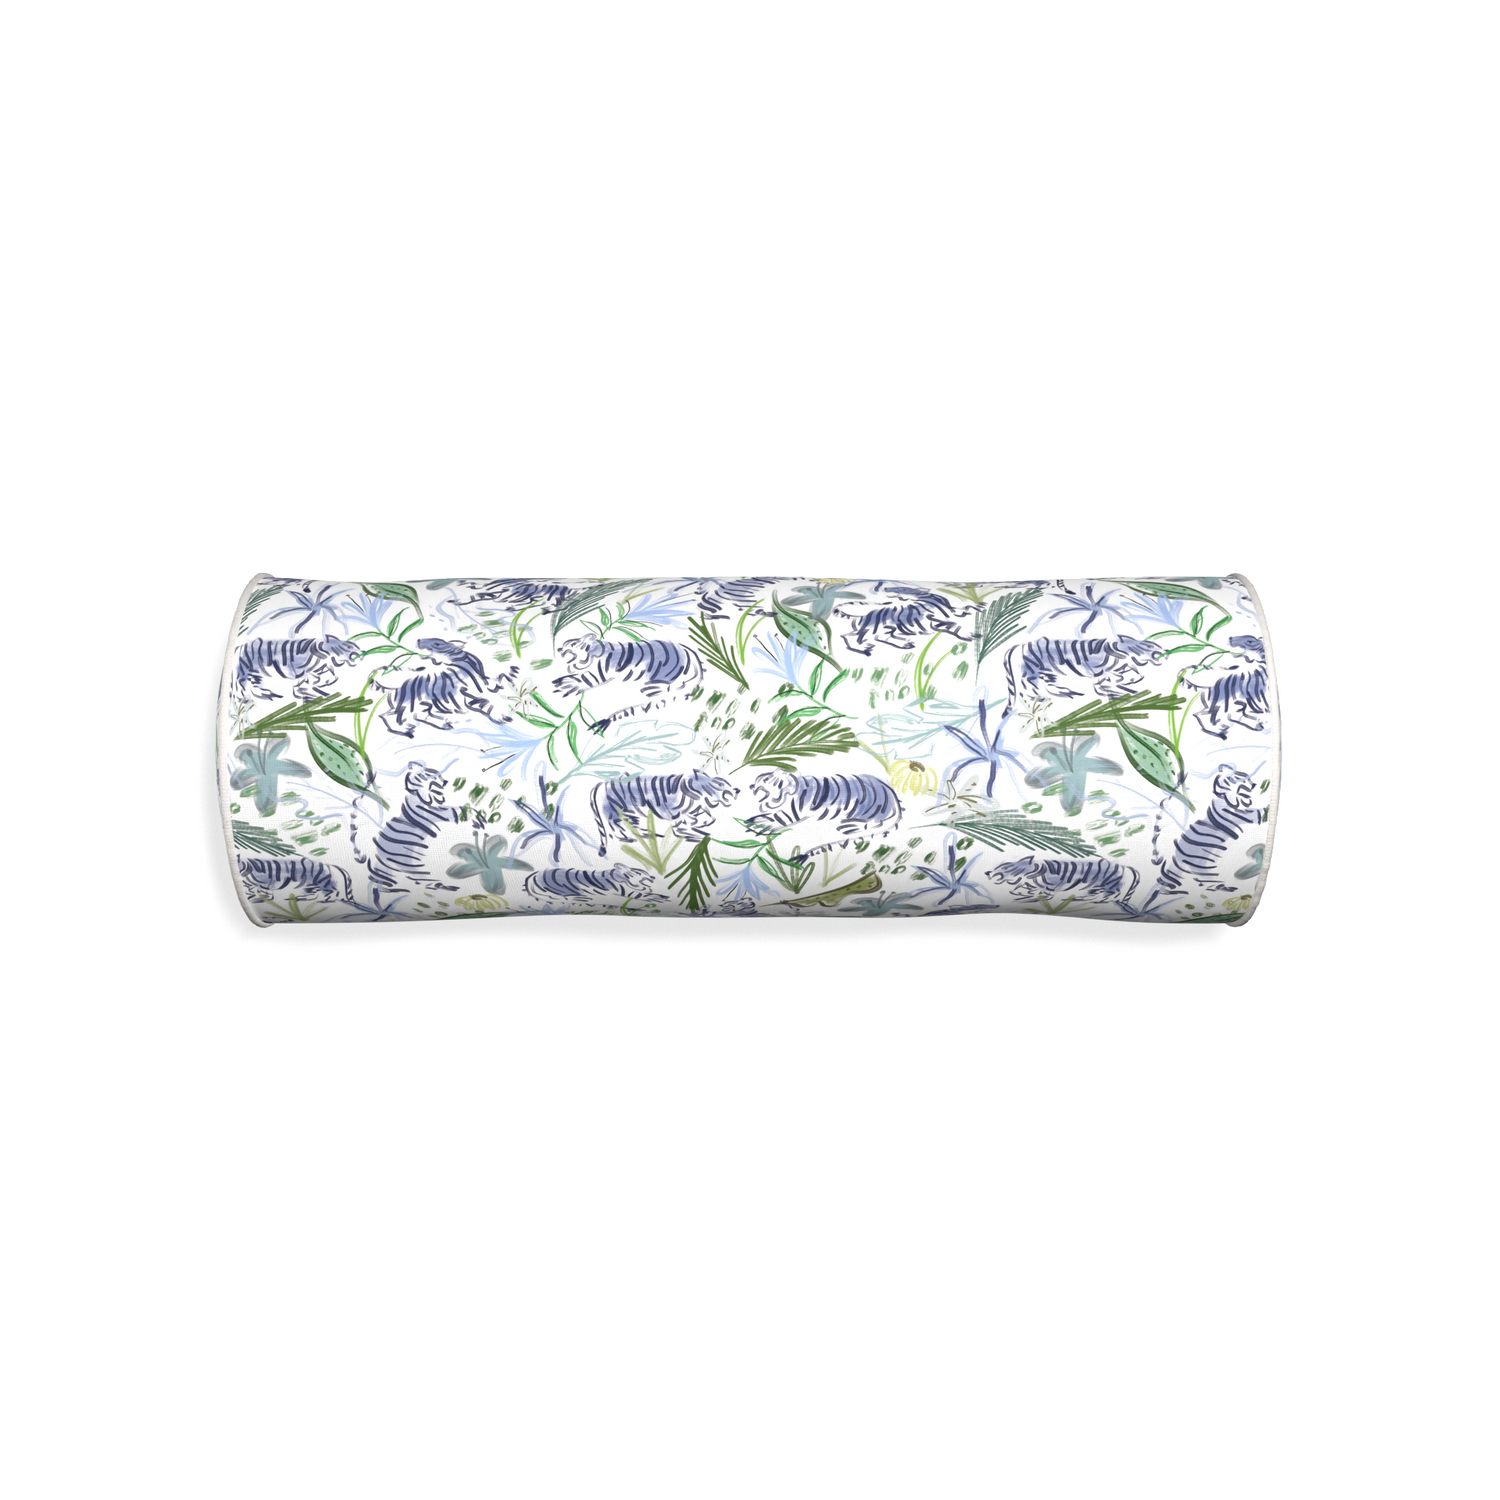 Bolster frida green custom green tigerpillow with snow piping on white background